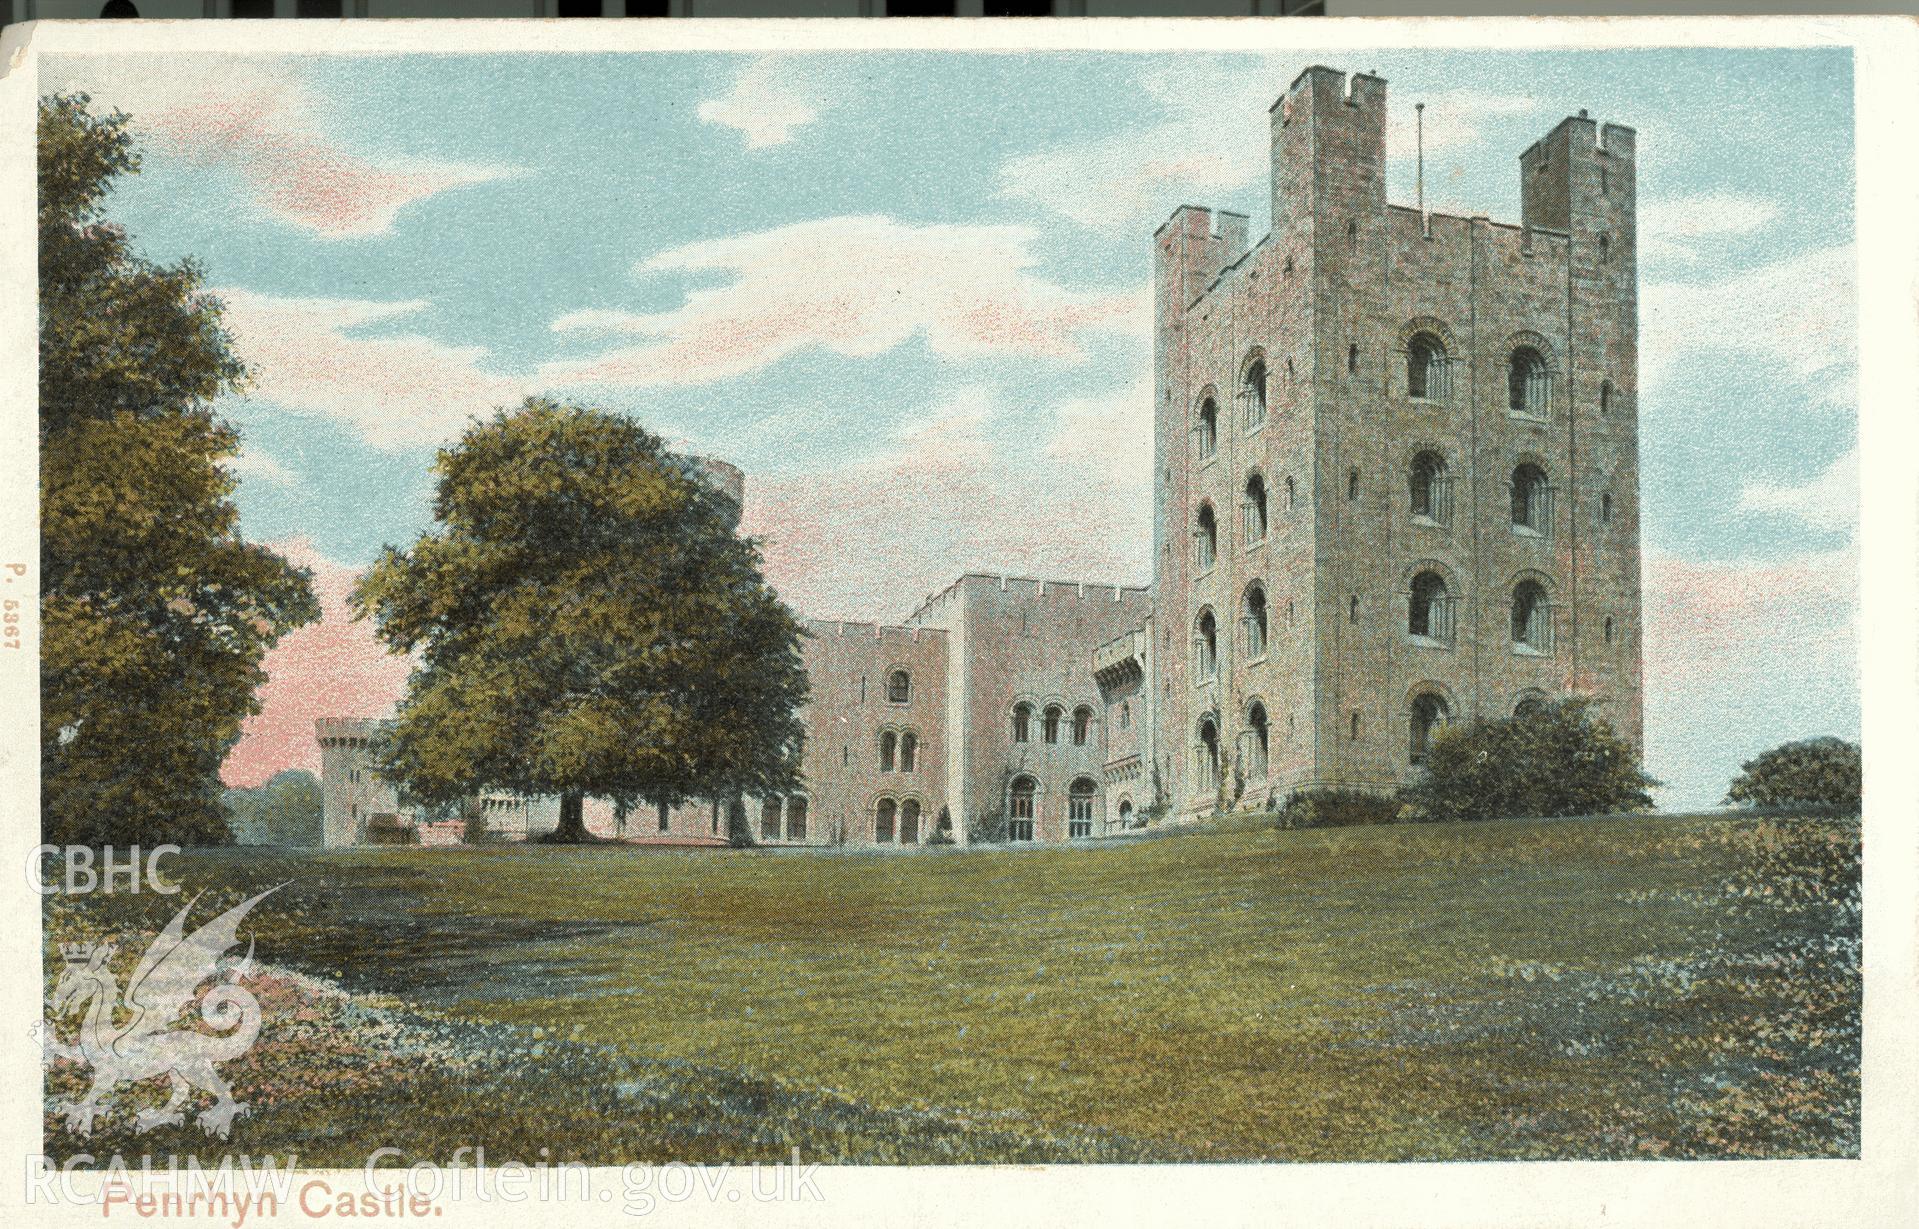 Digitised postcard image of Penrhyn Castle, Bangor, Pictorial Stationery Company Ltd. Produced by Parks and Gardens Data Services, from an original item in the Peter Davis Collection at Parks and Gardens UK. We hold only web-resolution images of this collection, suitable for viewing on screen and for research purposes only. We do not hold the original images, or publication quality scans.